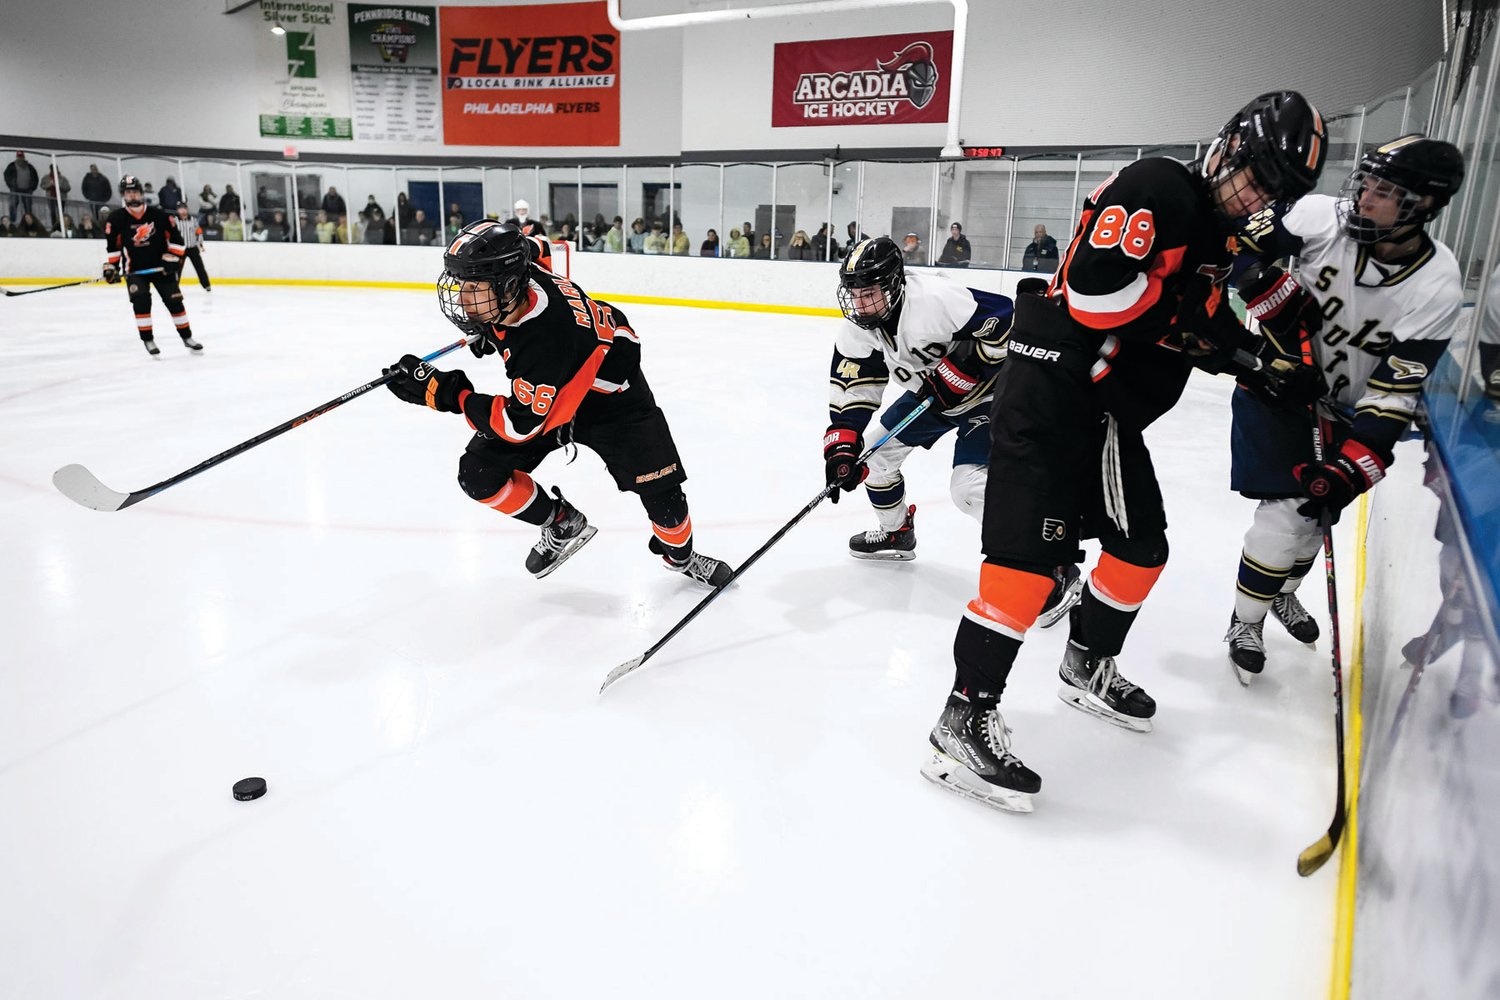 Pennsbury’s Justin Marlin clears the zone after a battle in the boards.